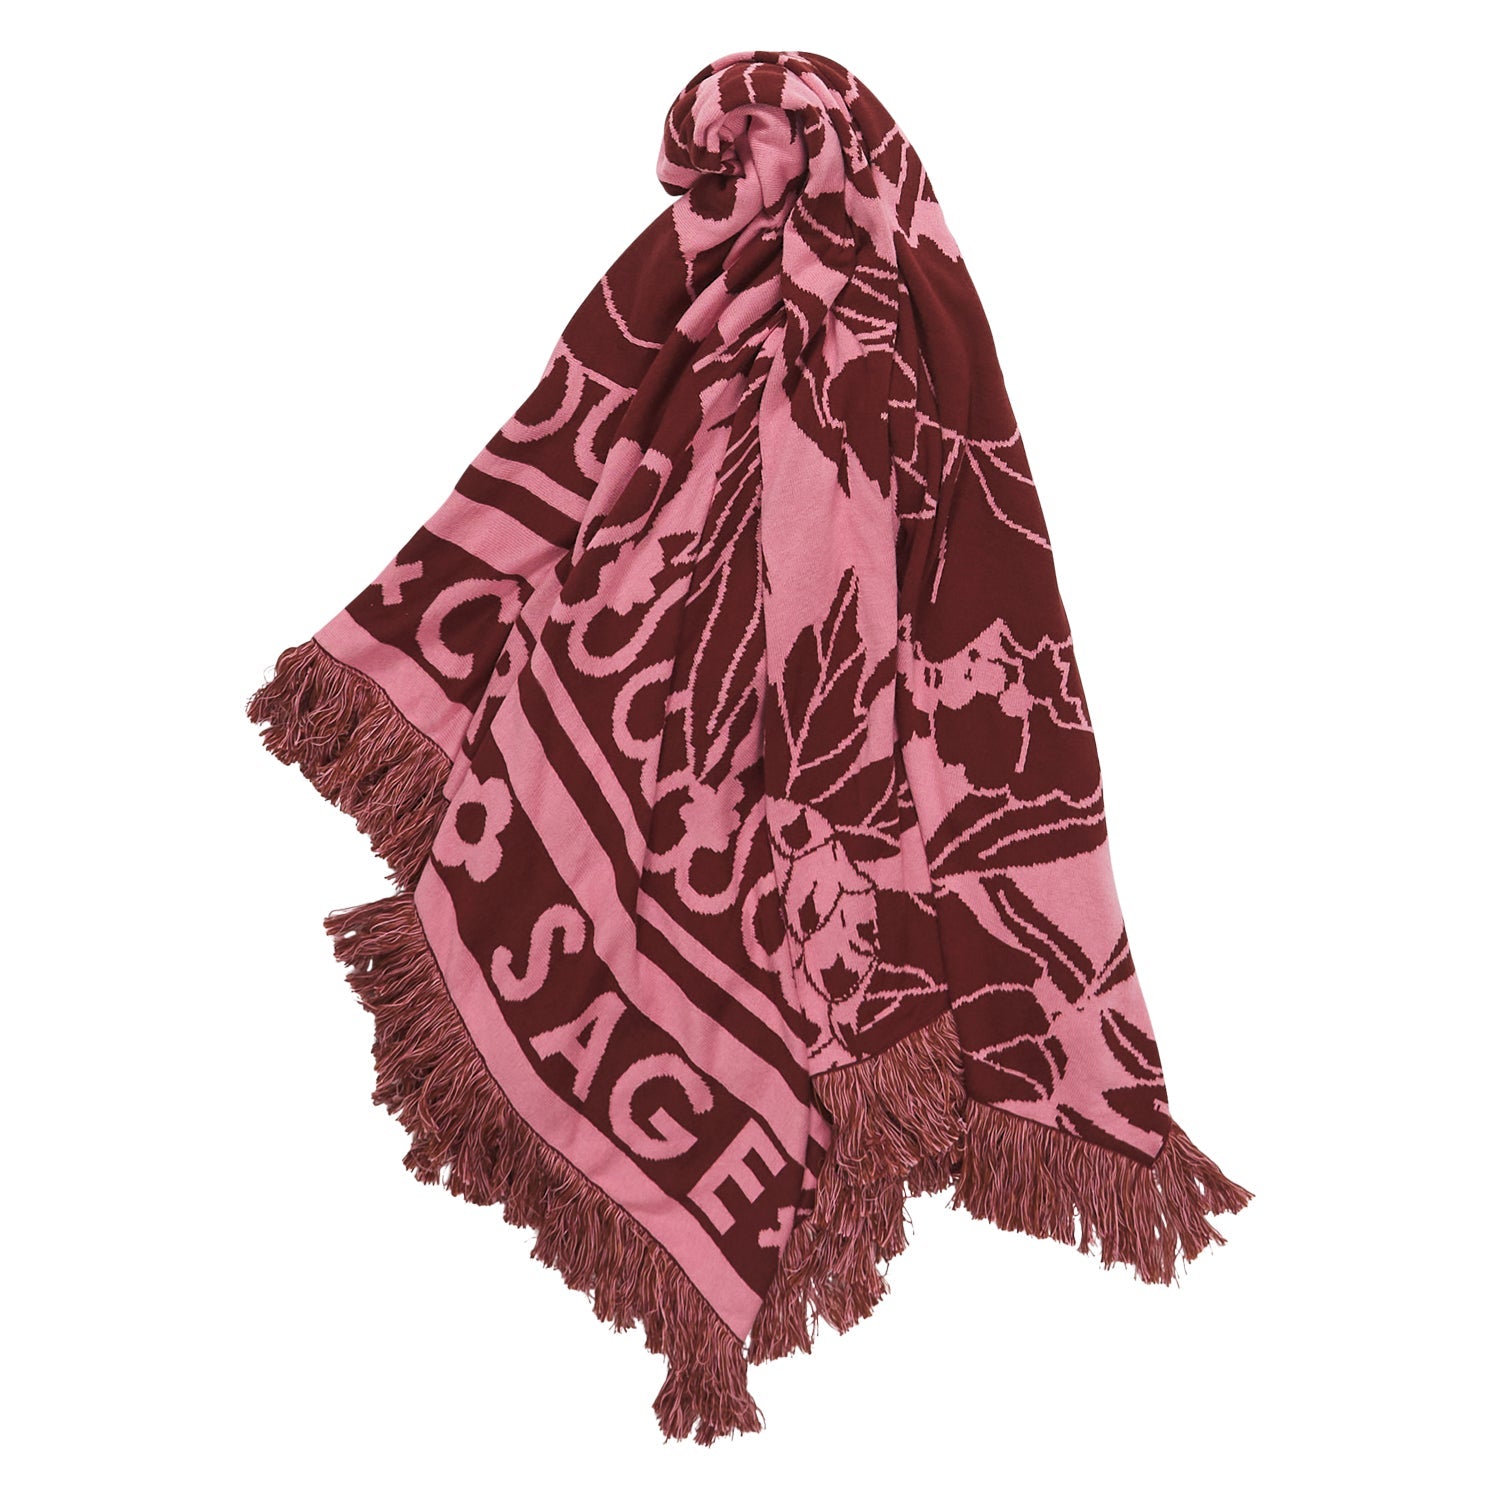 Alexa Jacquard Knit Throw-Soft Furnishings-PLAY by Sage & Clare-The Bay Room